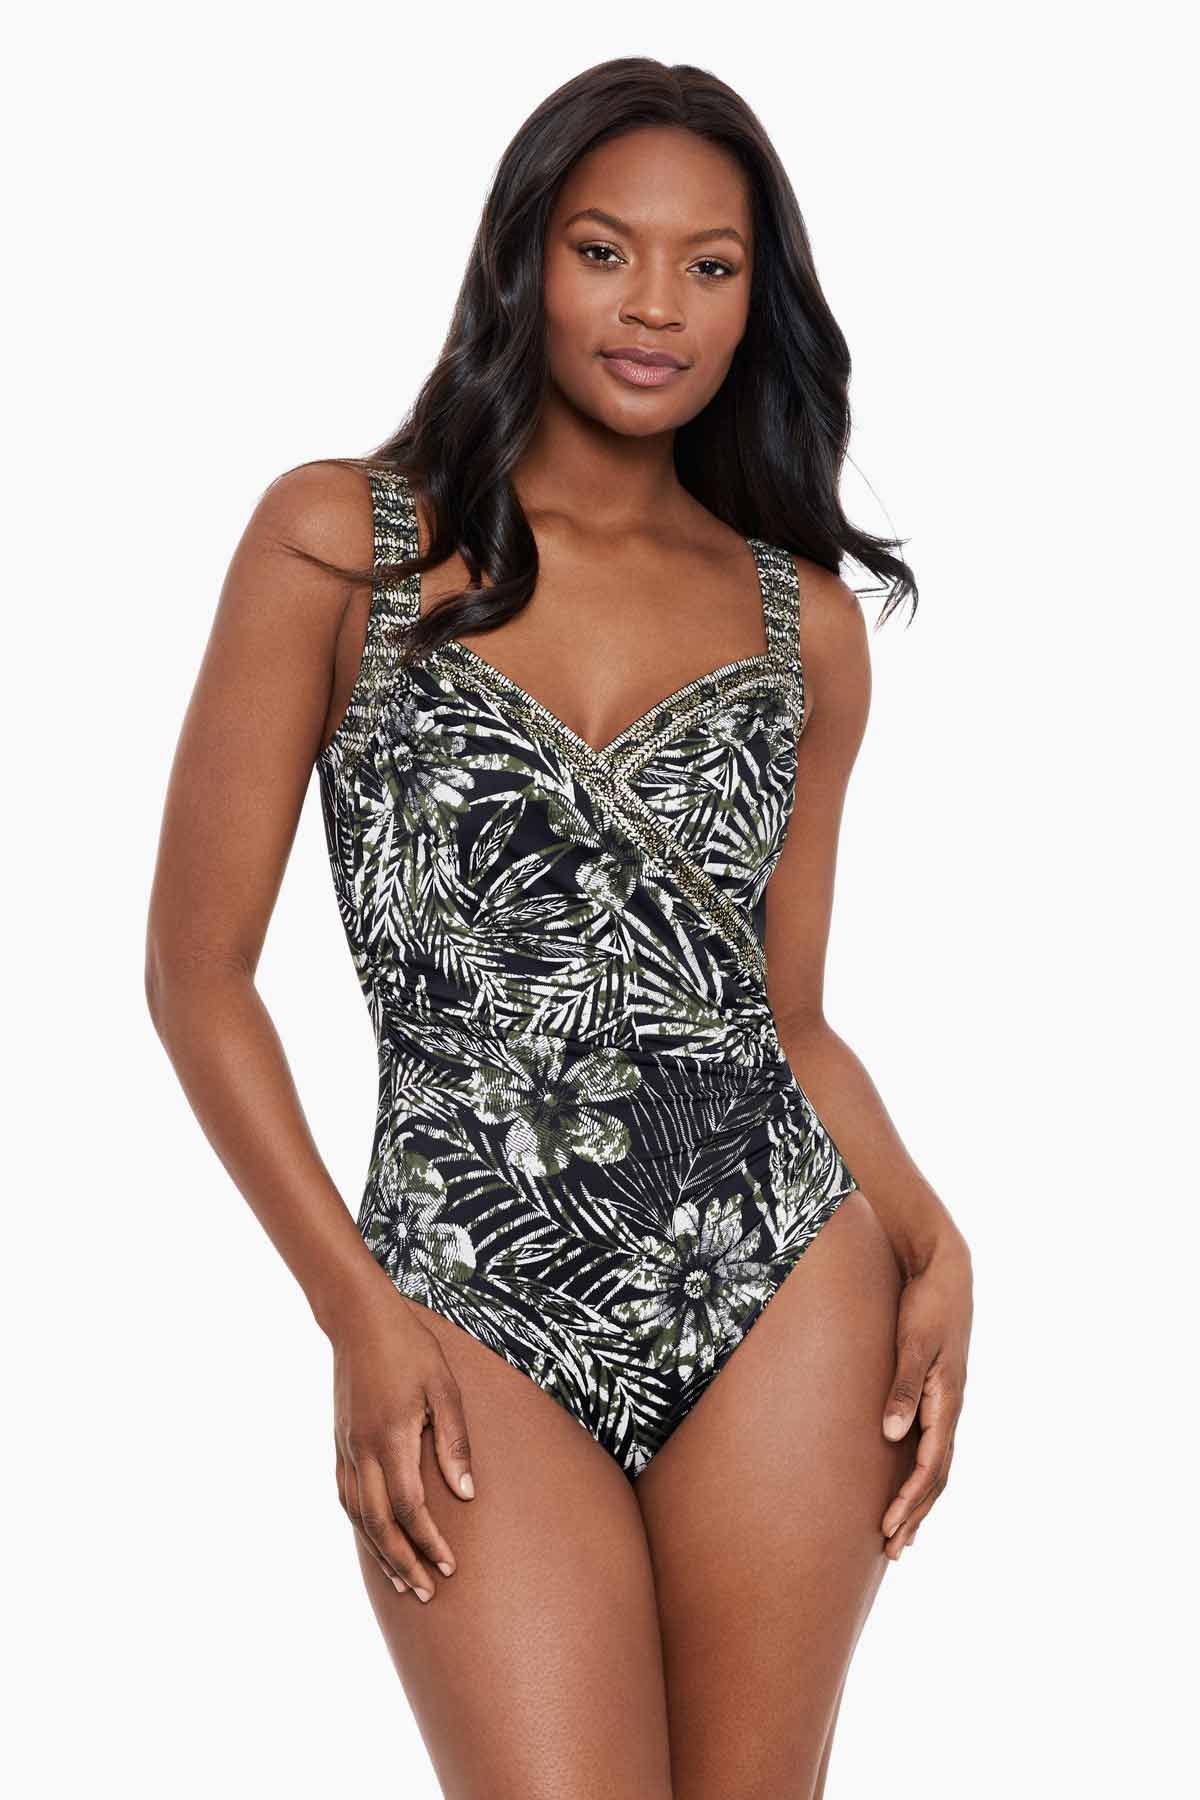 Tummy Control One Piece Swimsuits